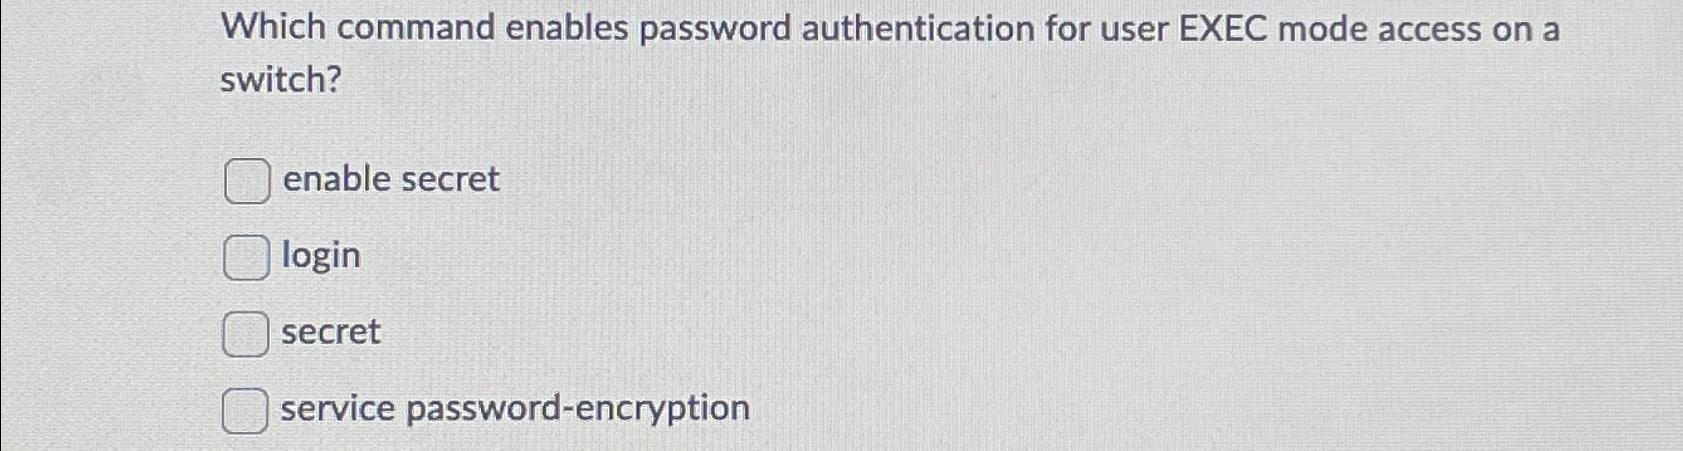 Which command enables password authentication for user EXEC mode access on a switch? enable secret login